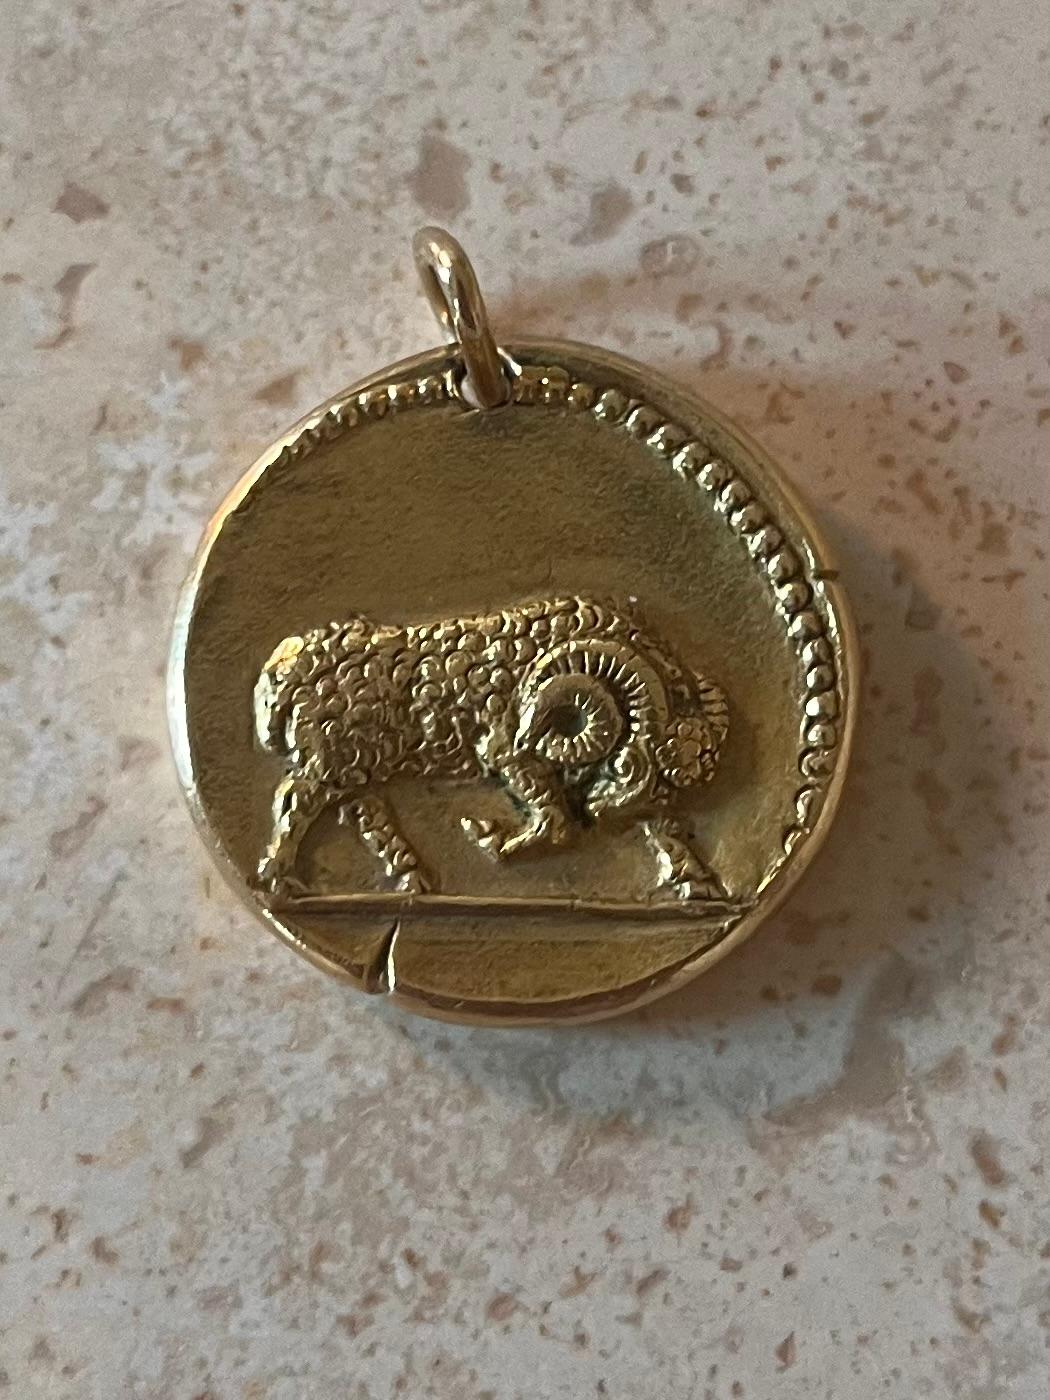 Modelled as an 18K yellow gold medallic pendant, one side depicting Aries the ram in raised relief, the reverse showing the dates of this zodiac sign with Roman numeral. Designed by Georges Lenfant in the 60s. Signed and numbered V.C.A. 118215
